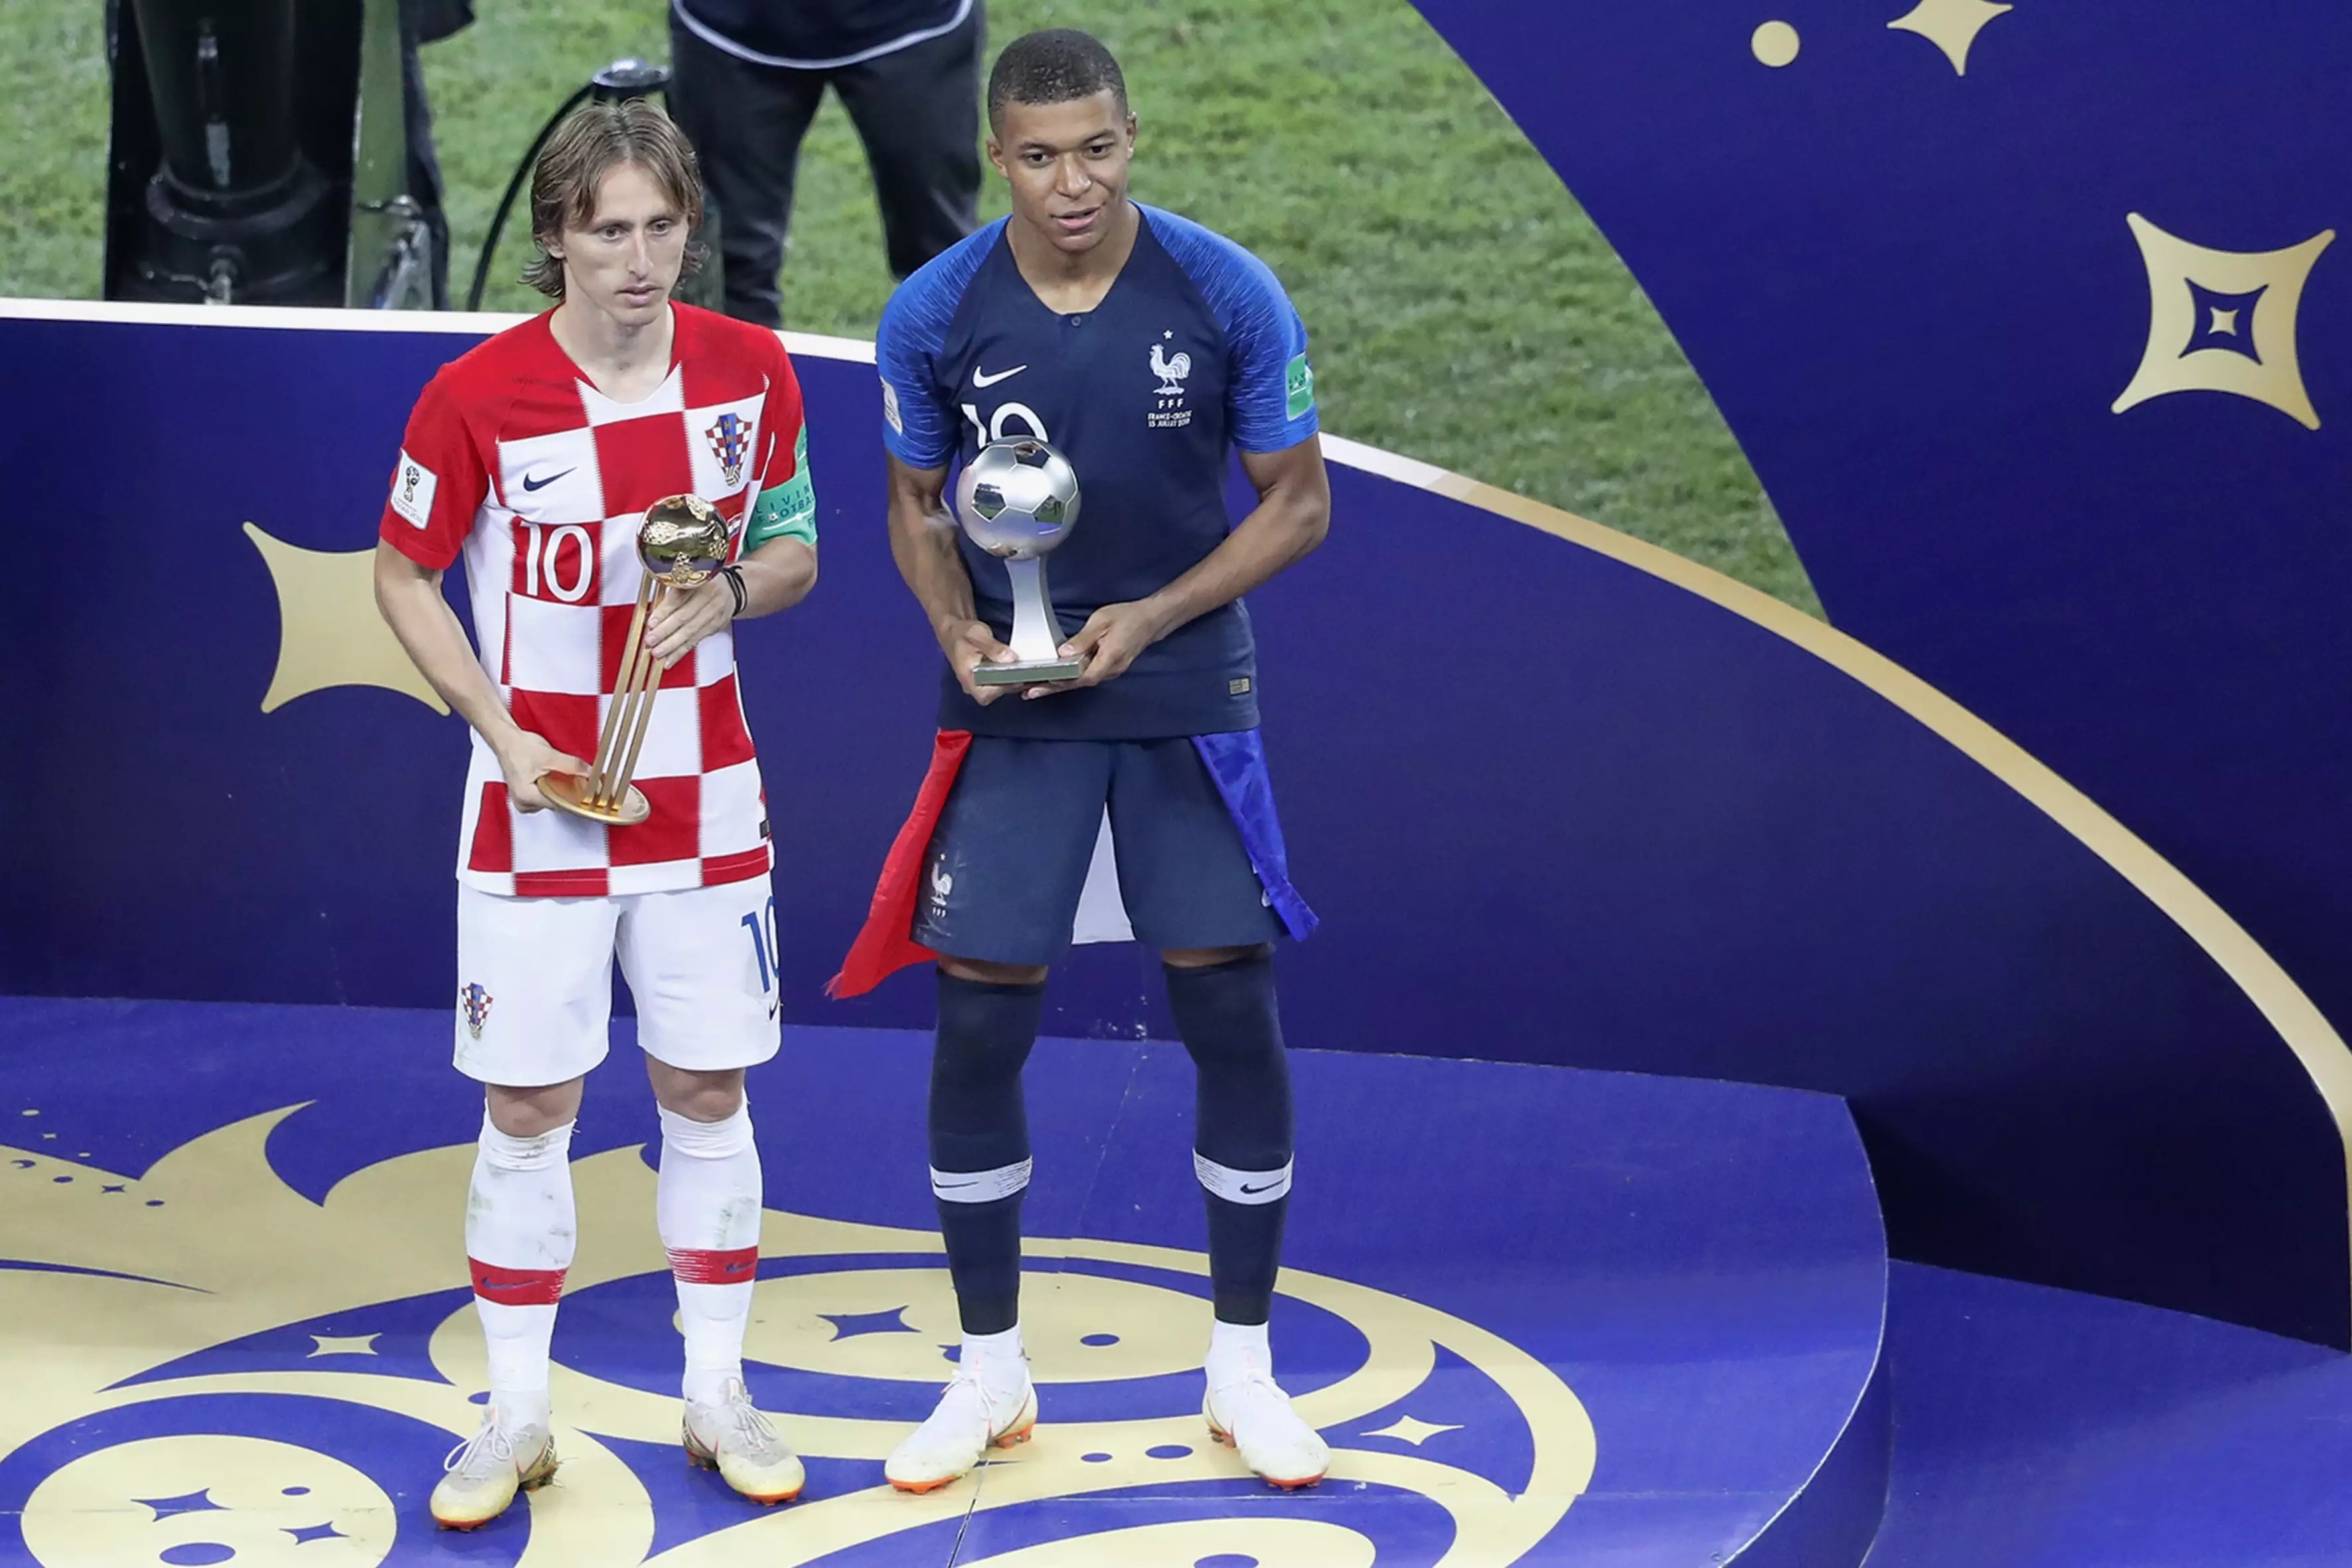 Mbappe won the award for best young player at the World Cup. Image: PA Images